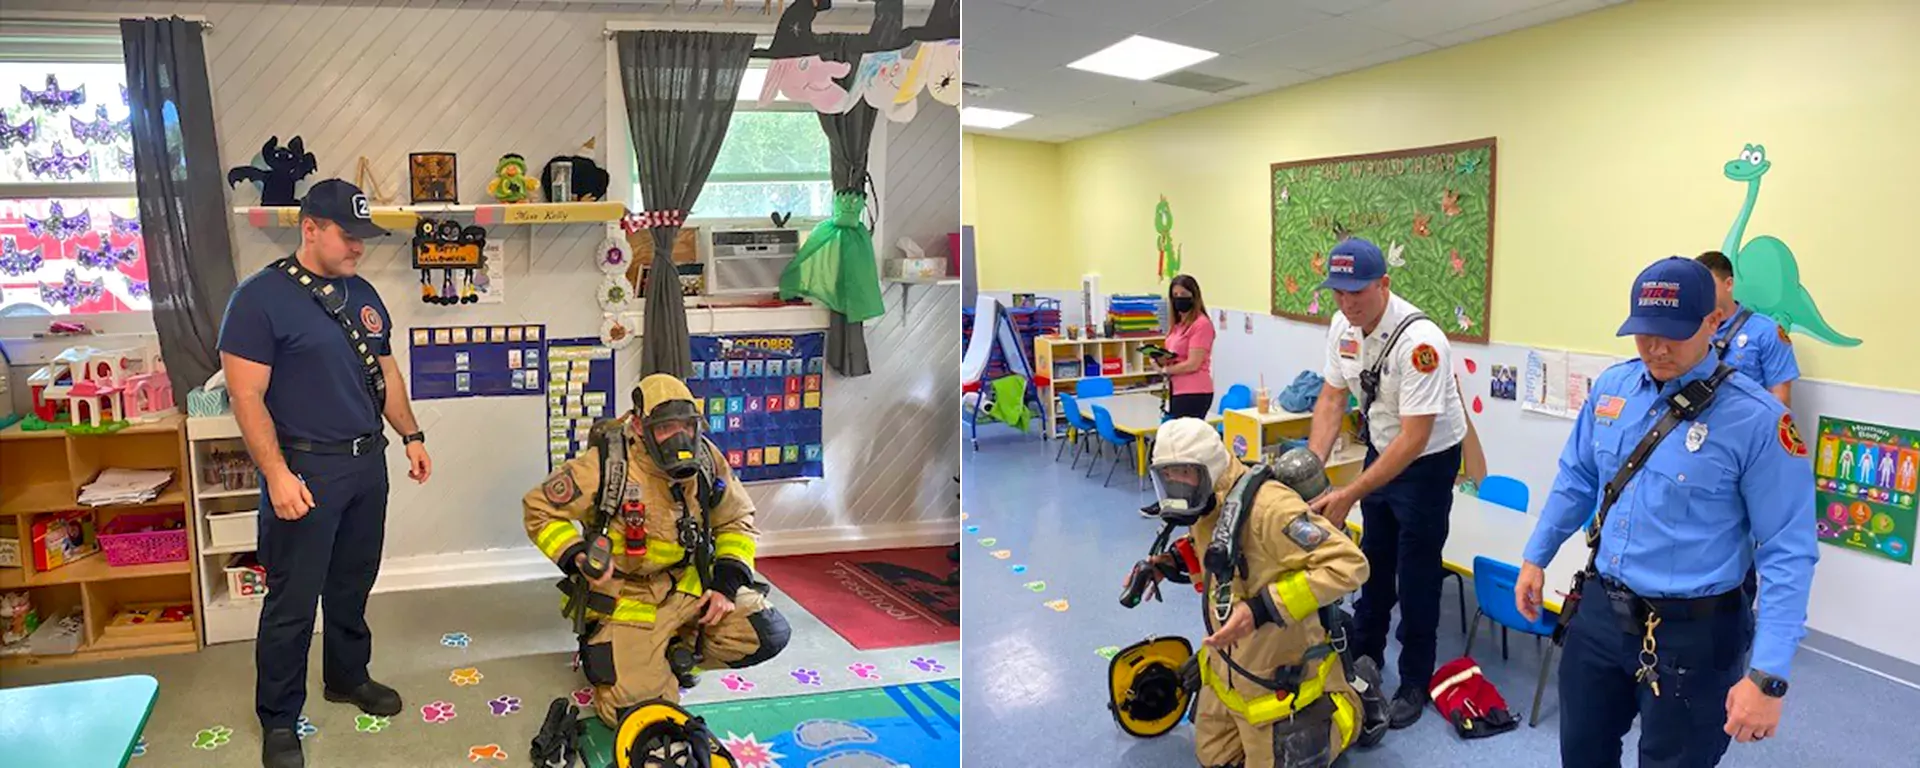 Firefighters teaching kids fire safety in a classsroom